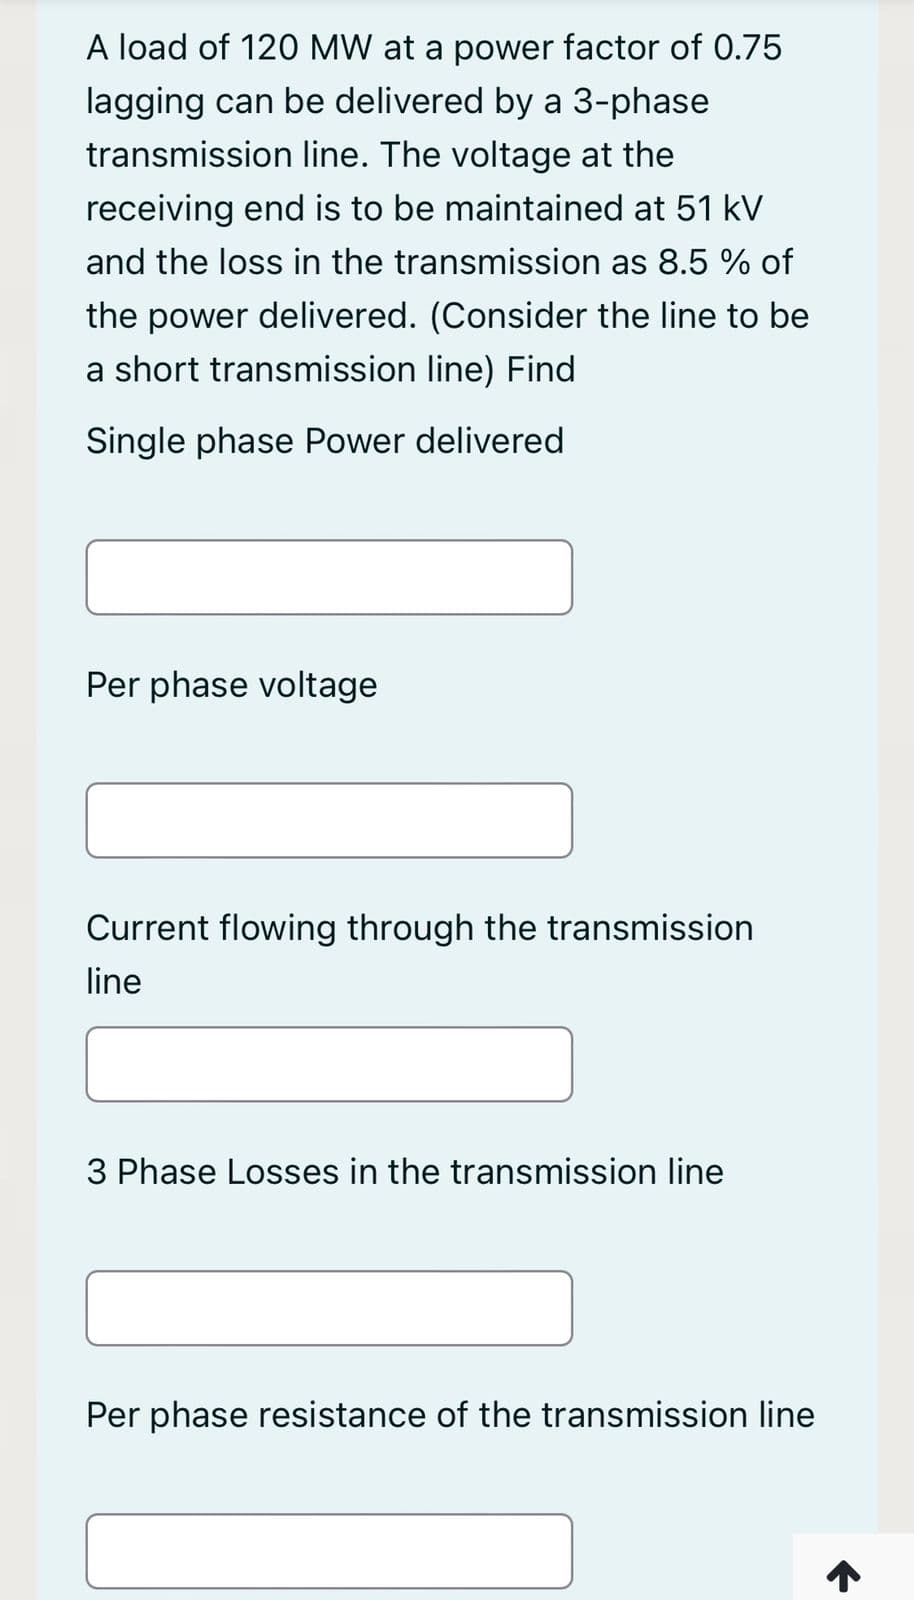 A load of 120 MW at a power factor of 0.75
lagging can be delivered by a 3-phase
transmission line. The voltage at the
receiving end is to be maintained at 51 kV
and the loss in the transmission as 8.5 % of
the power delivered. (Consider the line to be
a short transmission line) Find
Single phase Power delivered
Per phase voltage
Current flowing through the transmission
line
3 Phase Losses in the transmission line
Per phase resistance of the transmission line
